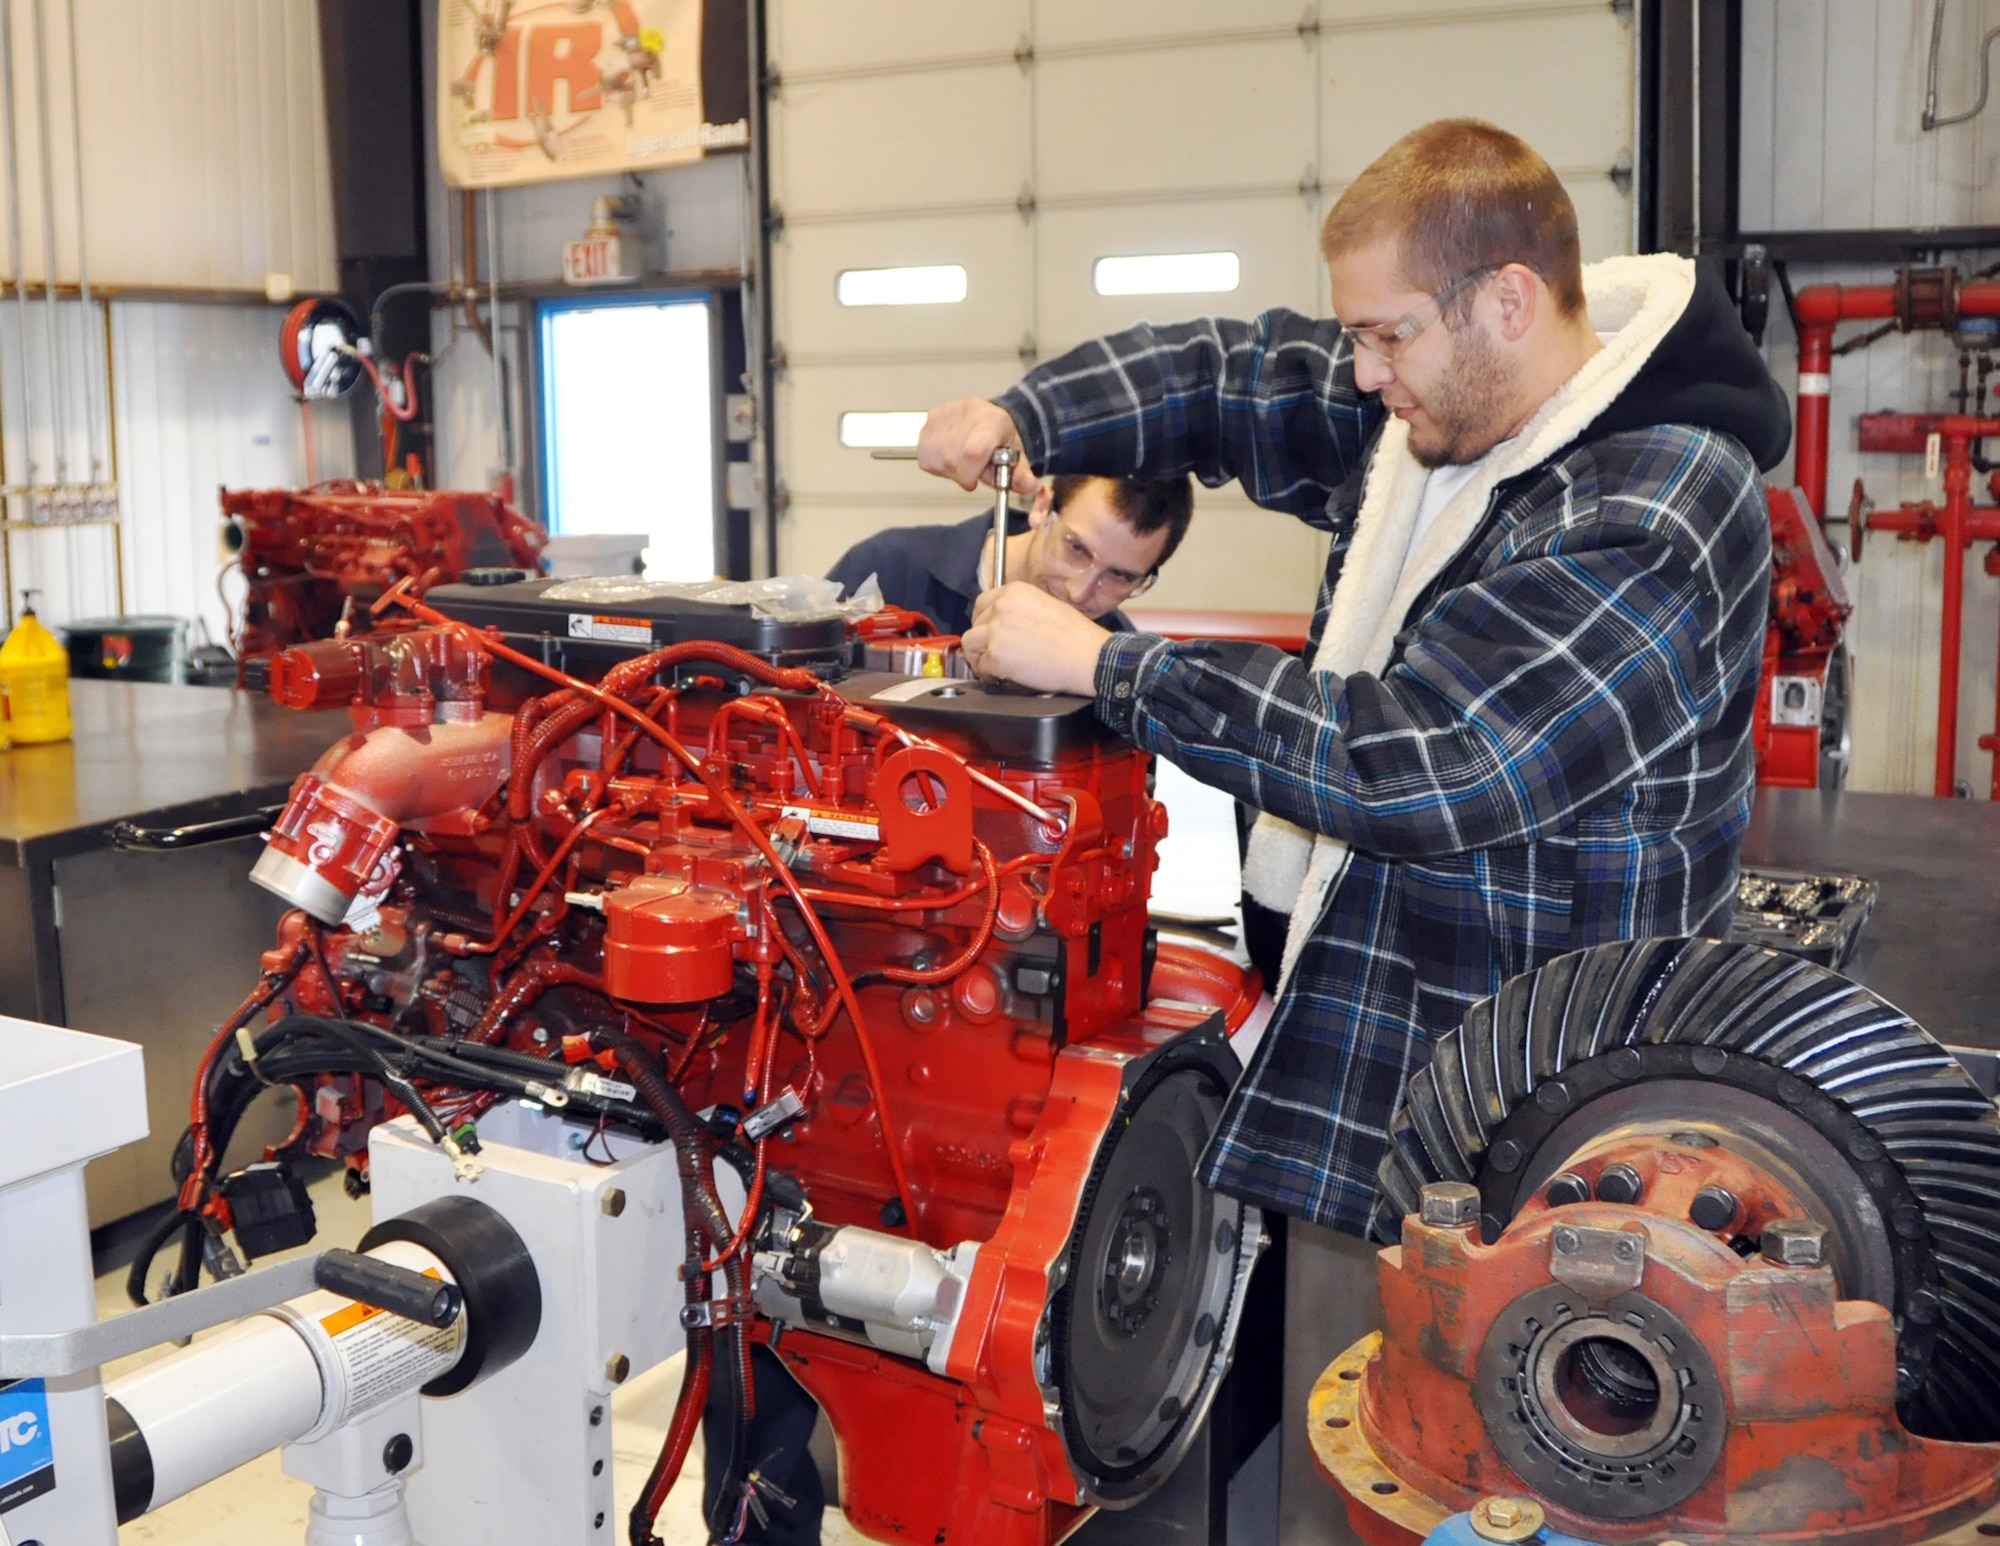 Todd Stretars (rear) and Martin Peck make adjustments to a diesel engine. Both students are enrolled in American River College's clean diesel technology program at the former Mather Air Force Base in Sacramento, Calif. (Courtesy photo)